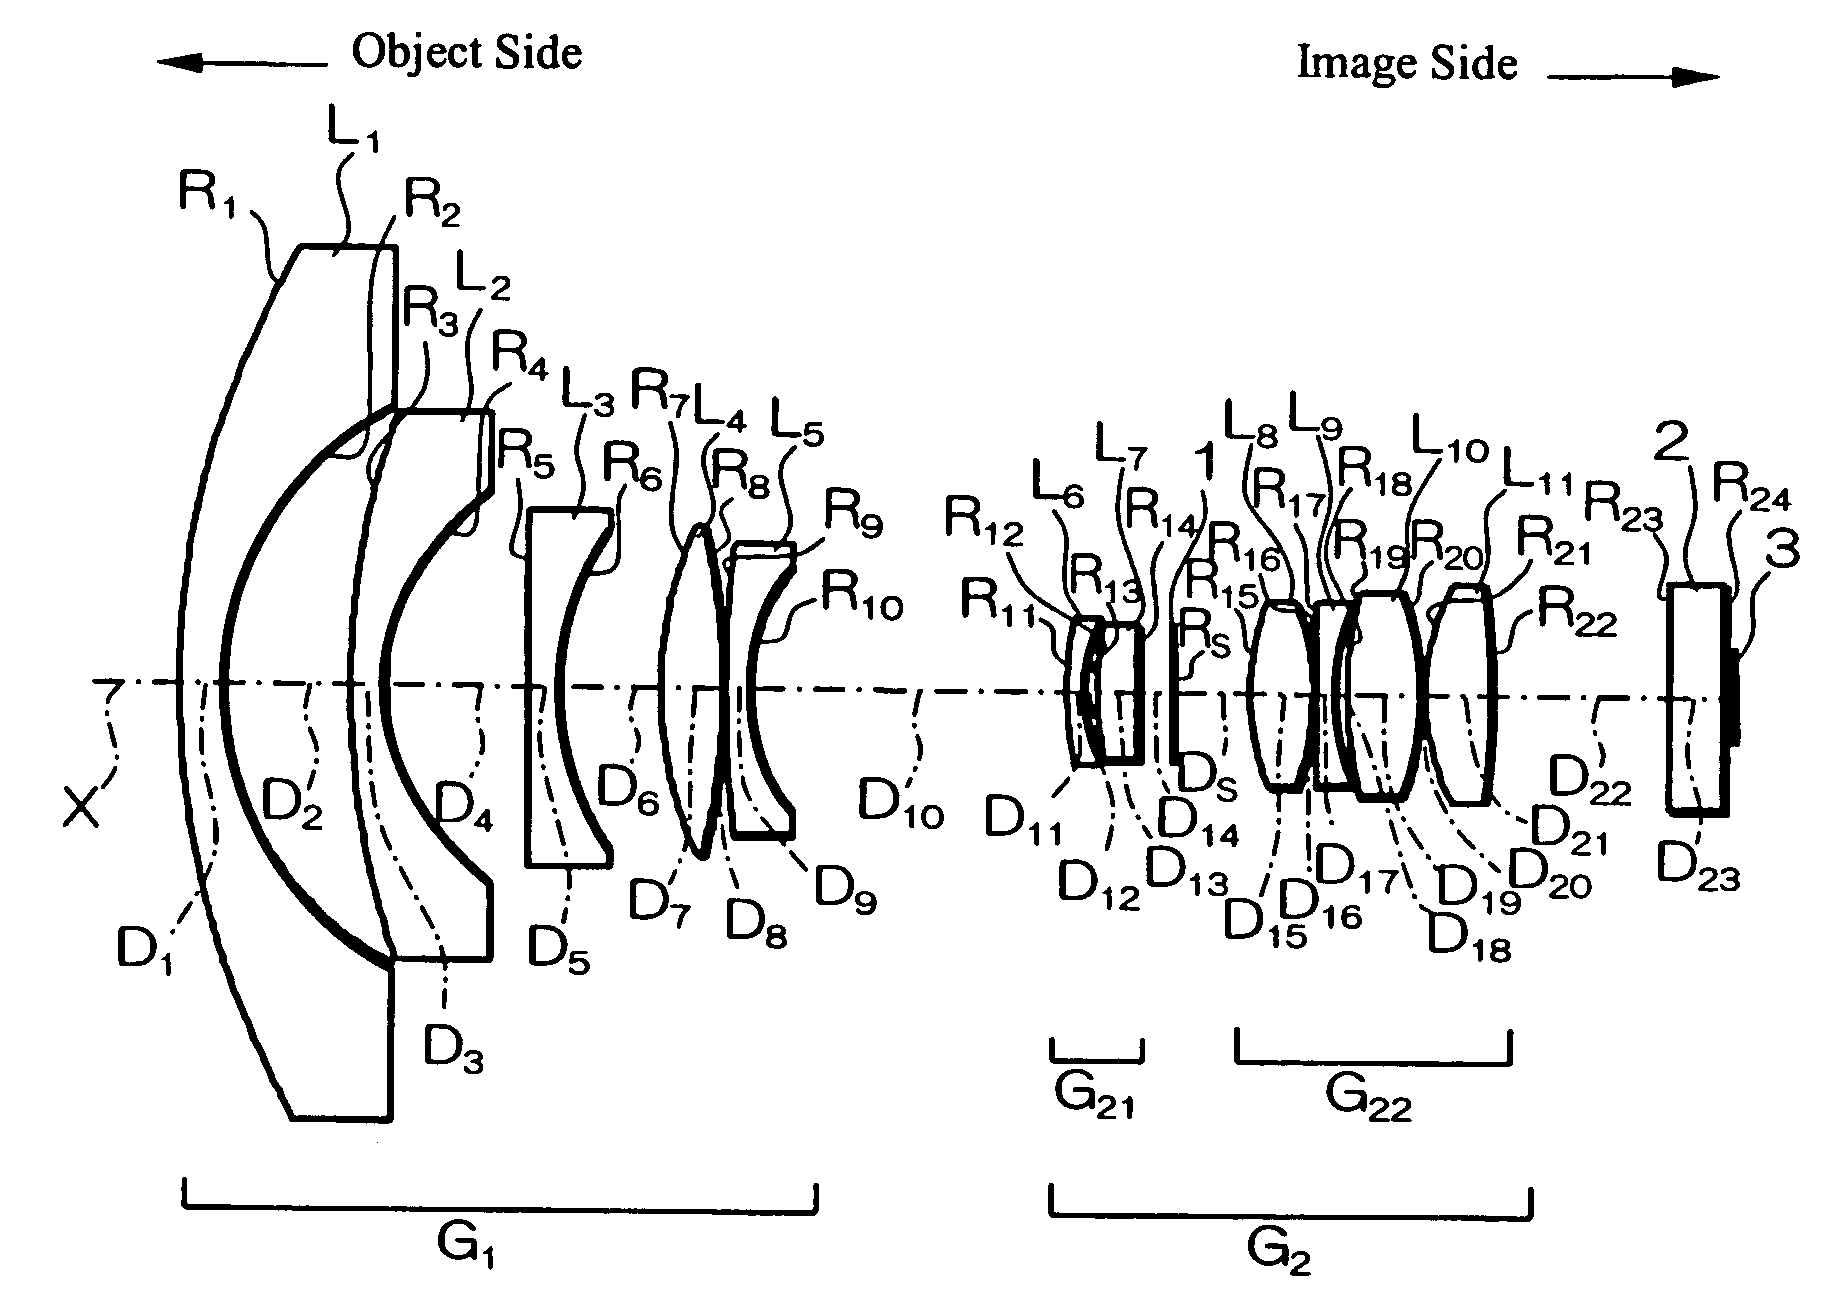 Fisheye lens and imaging device using it